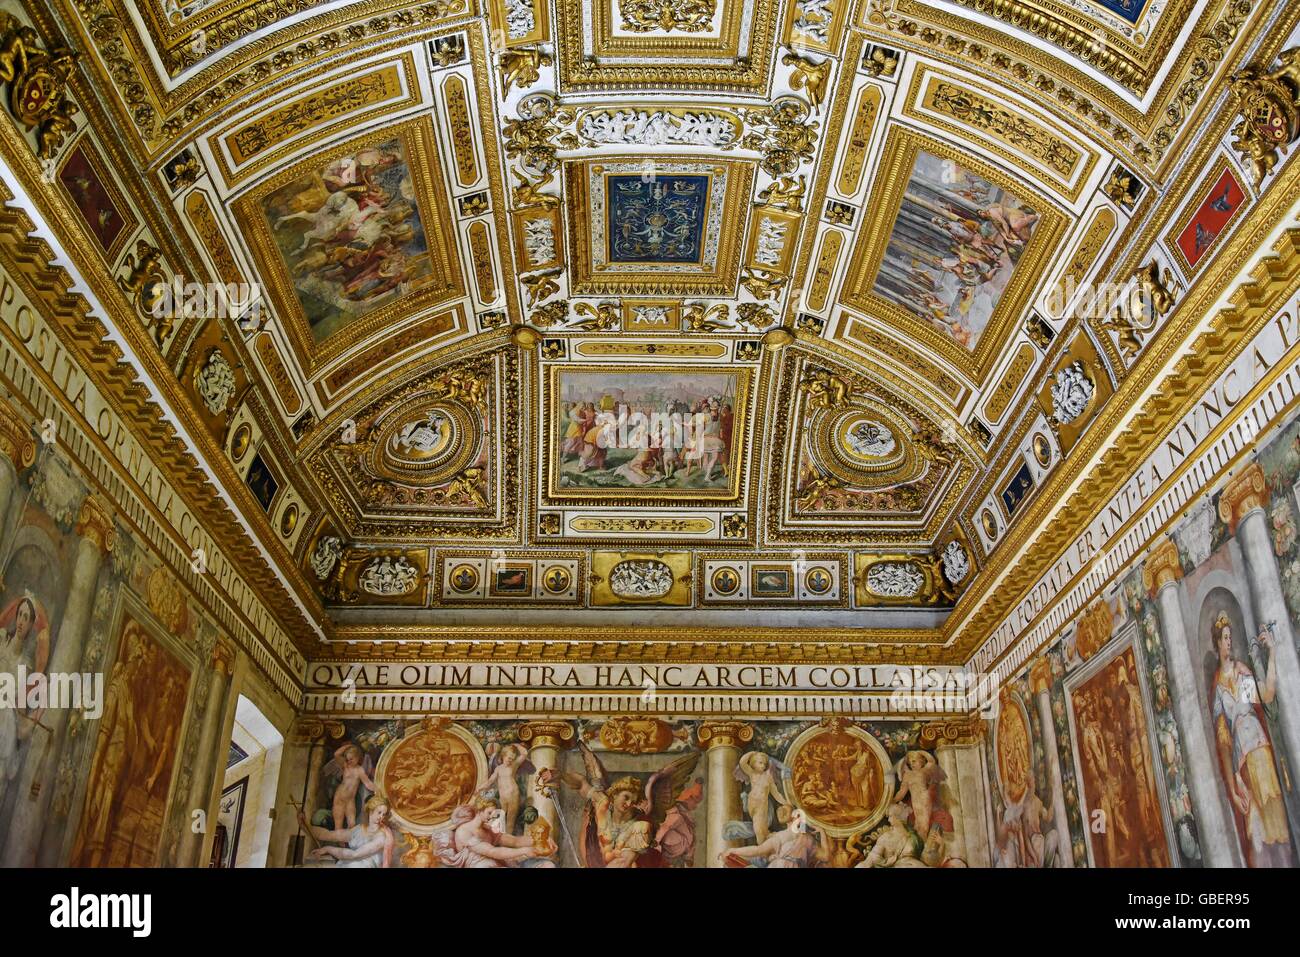 Ceiling paintings, paintings, golden decorations, Sala Paolina, Pope's chamber, Castel Sant Angelo, Sant Angelo, castle, museum, Rome, Lazio, Italy Stock Photo